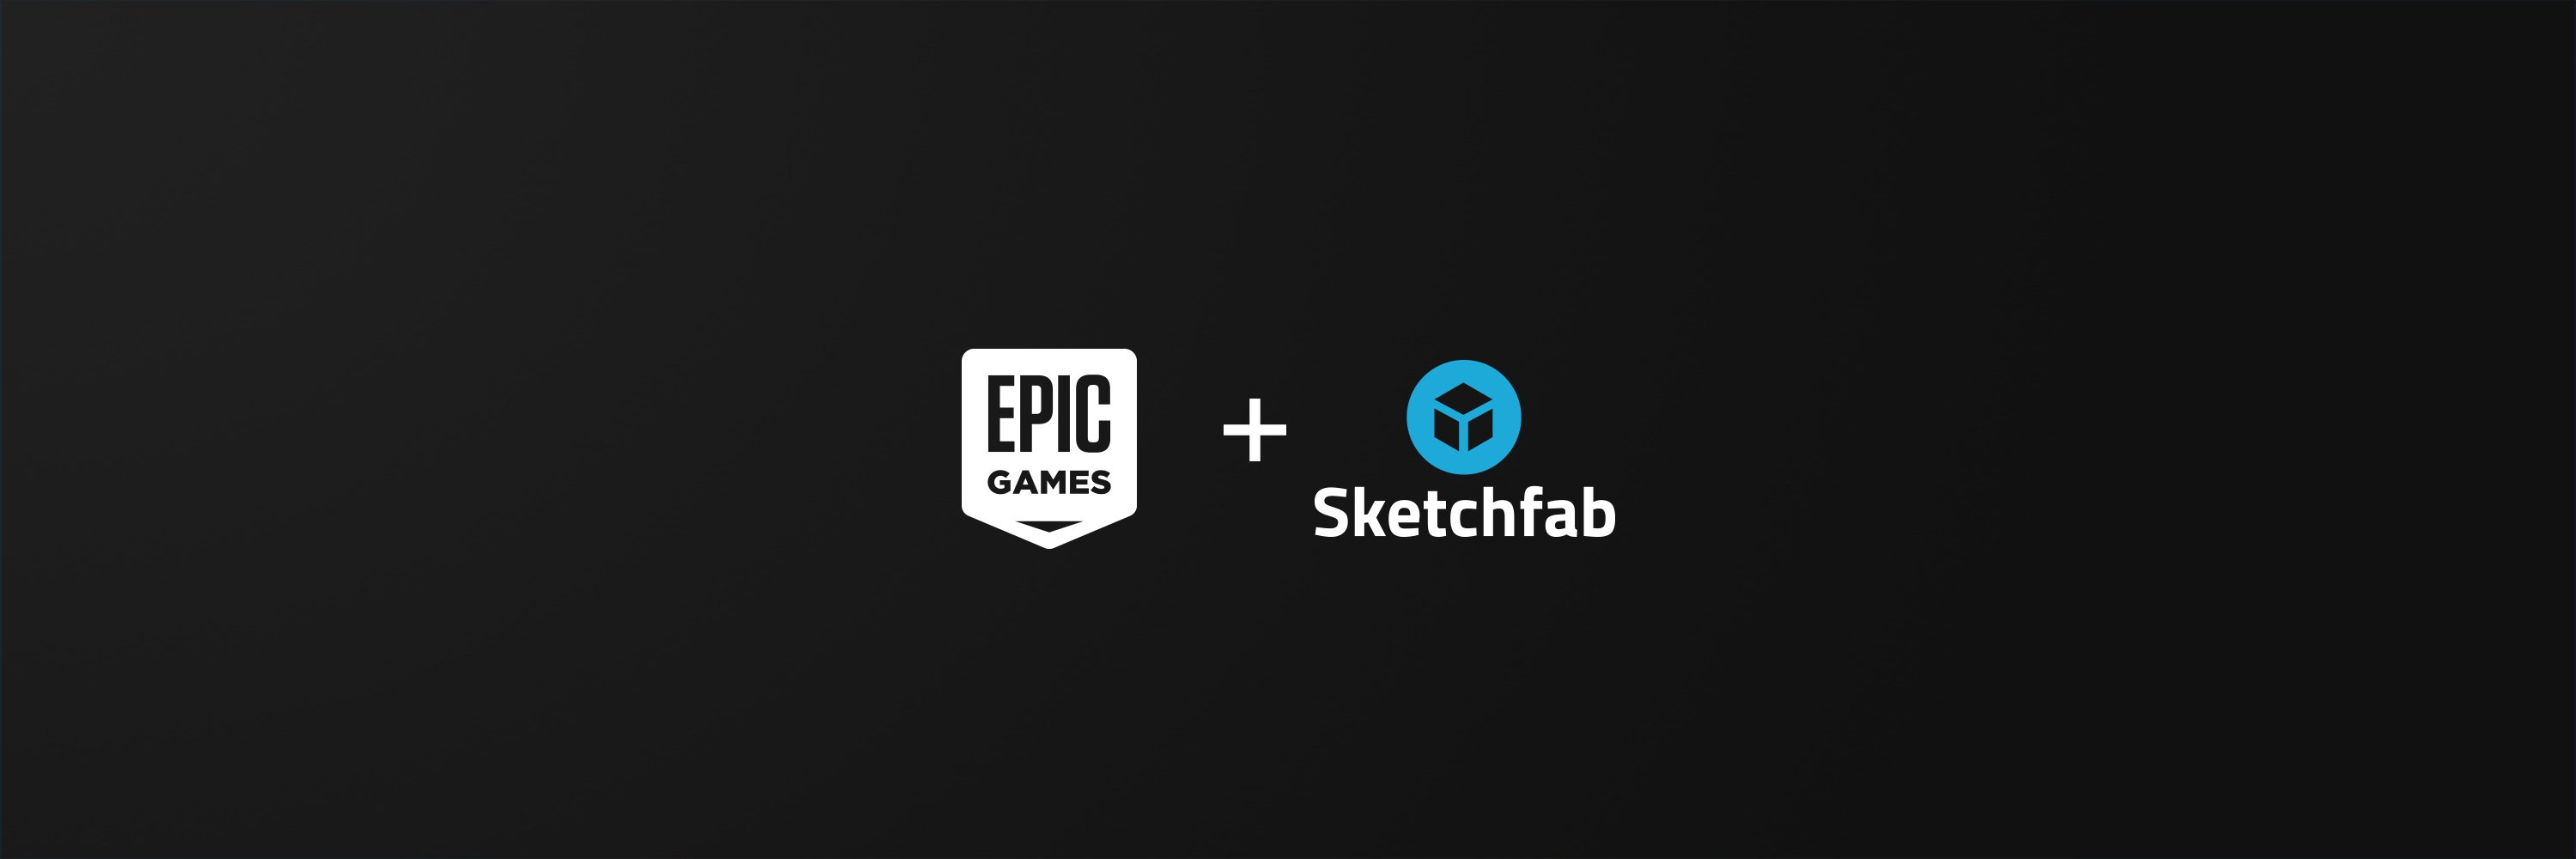 Almost 10 years ago, we started Sketchfab to make 3D content accessible through the web. We launched the first web-based 3D player on the market, and 